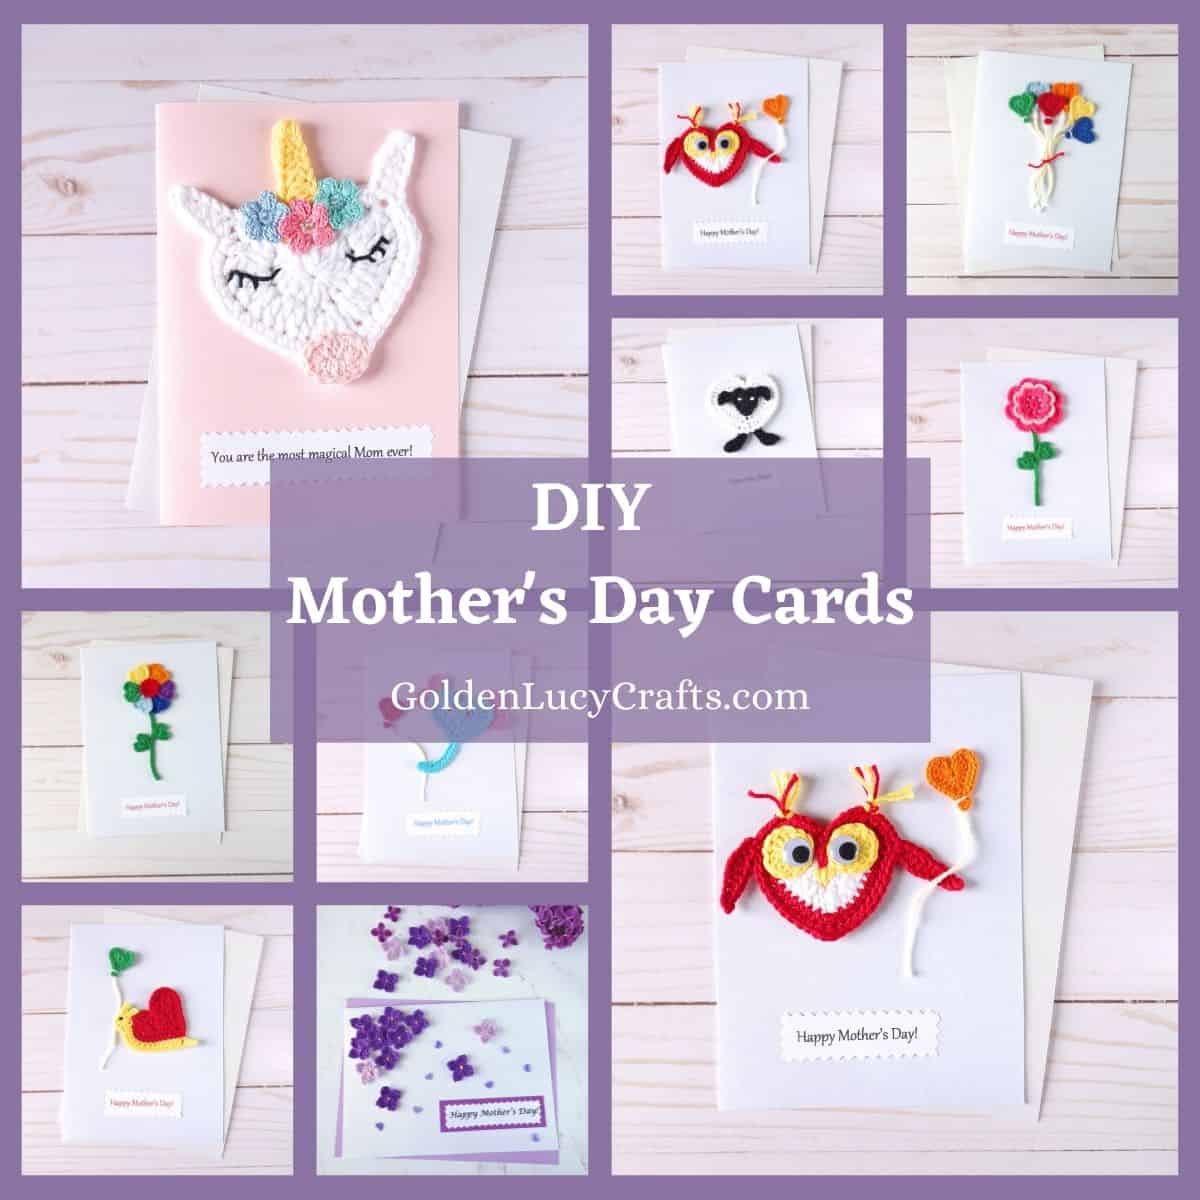 DIY Mother's Day cards photo collage.